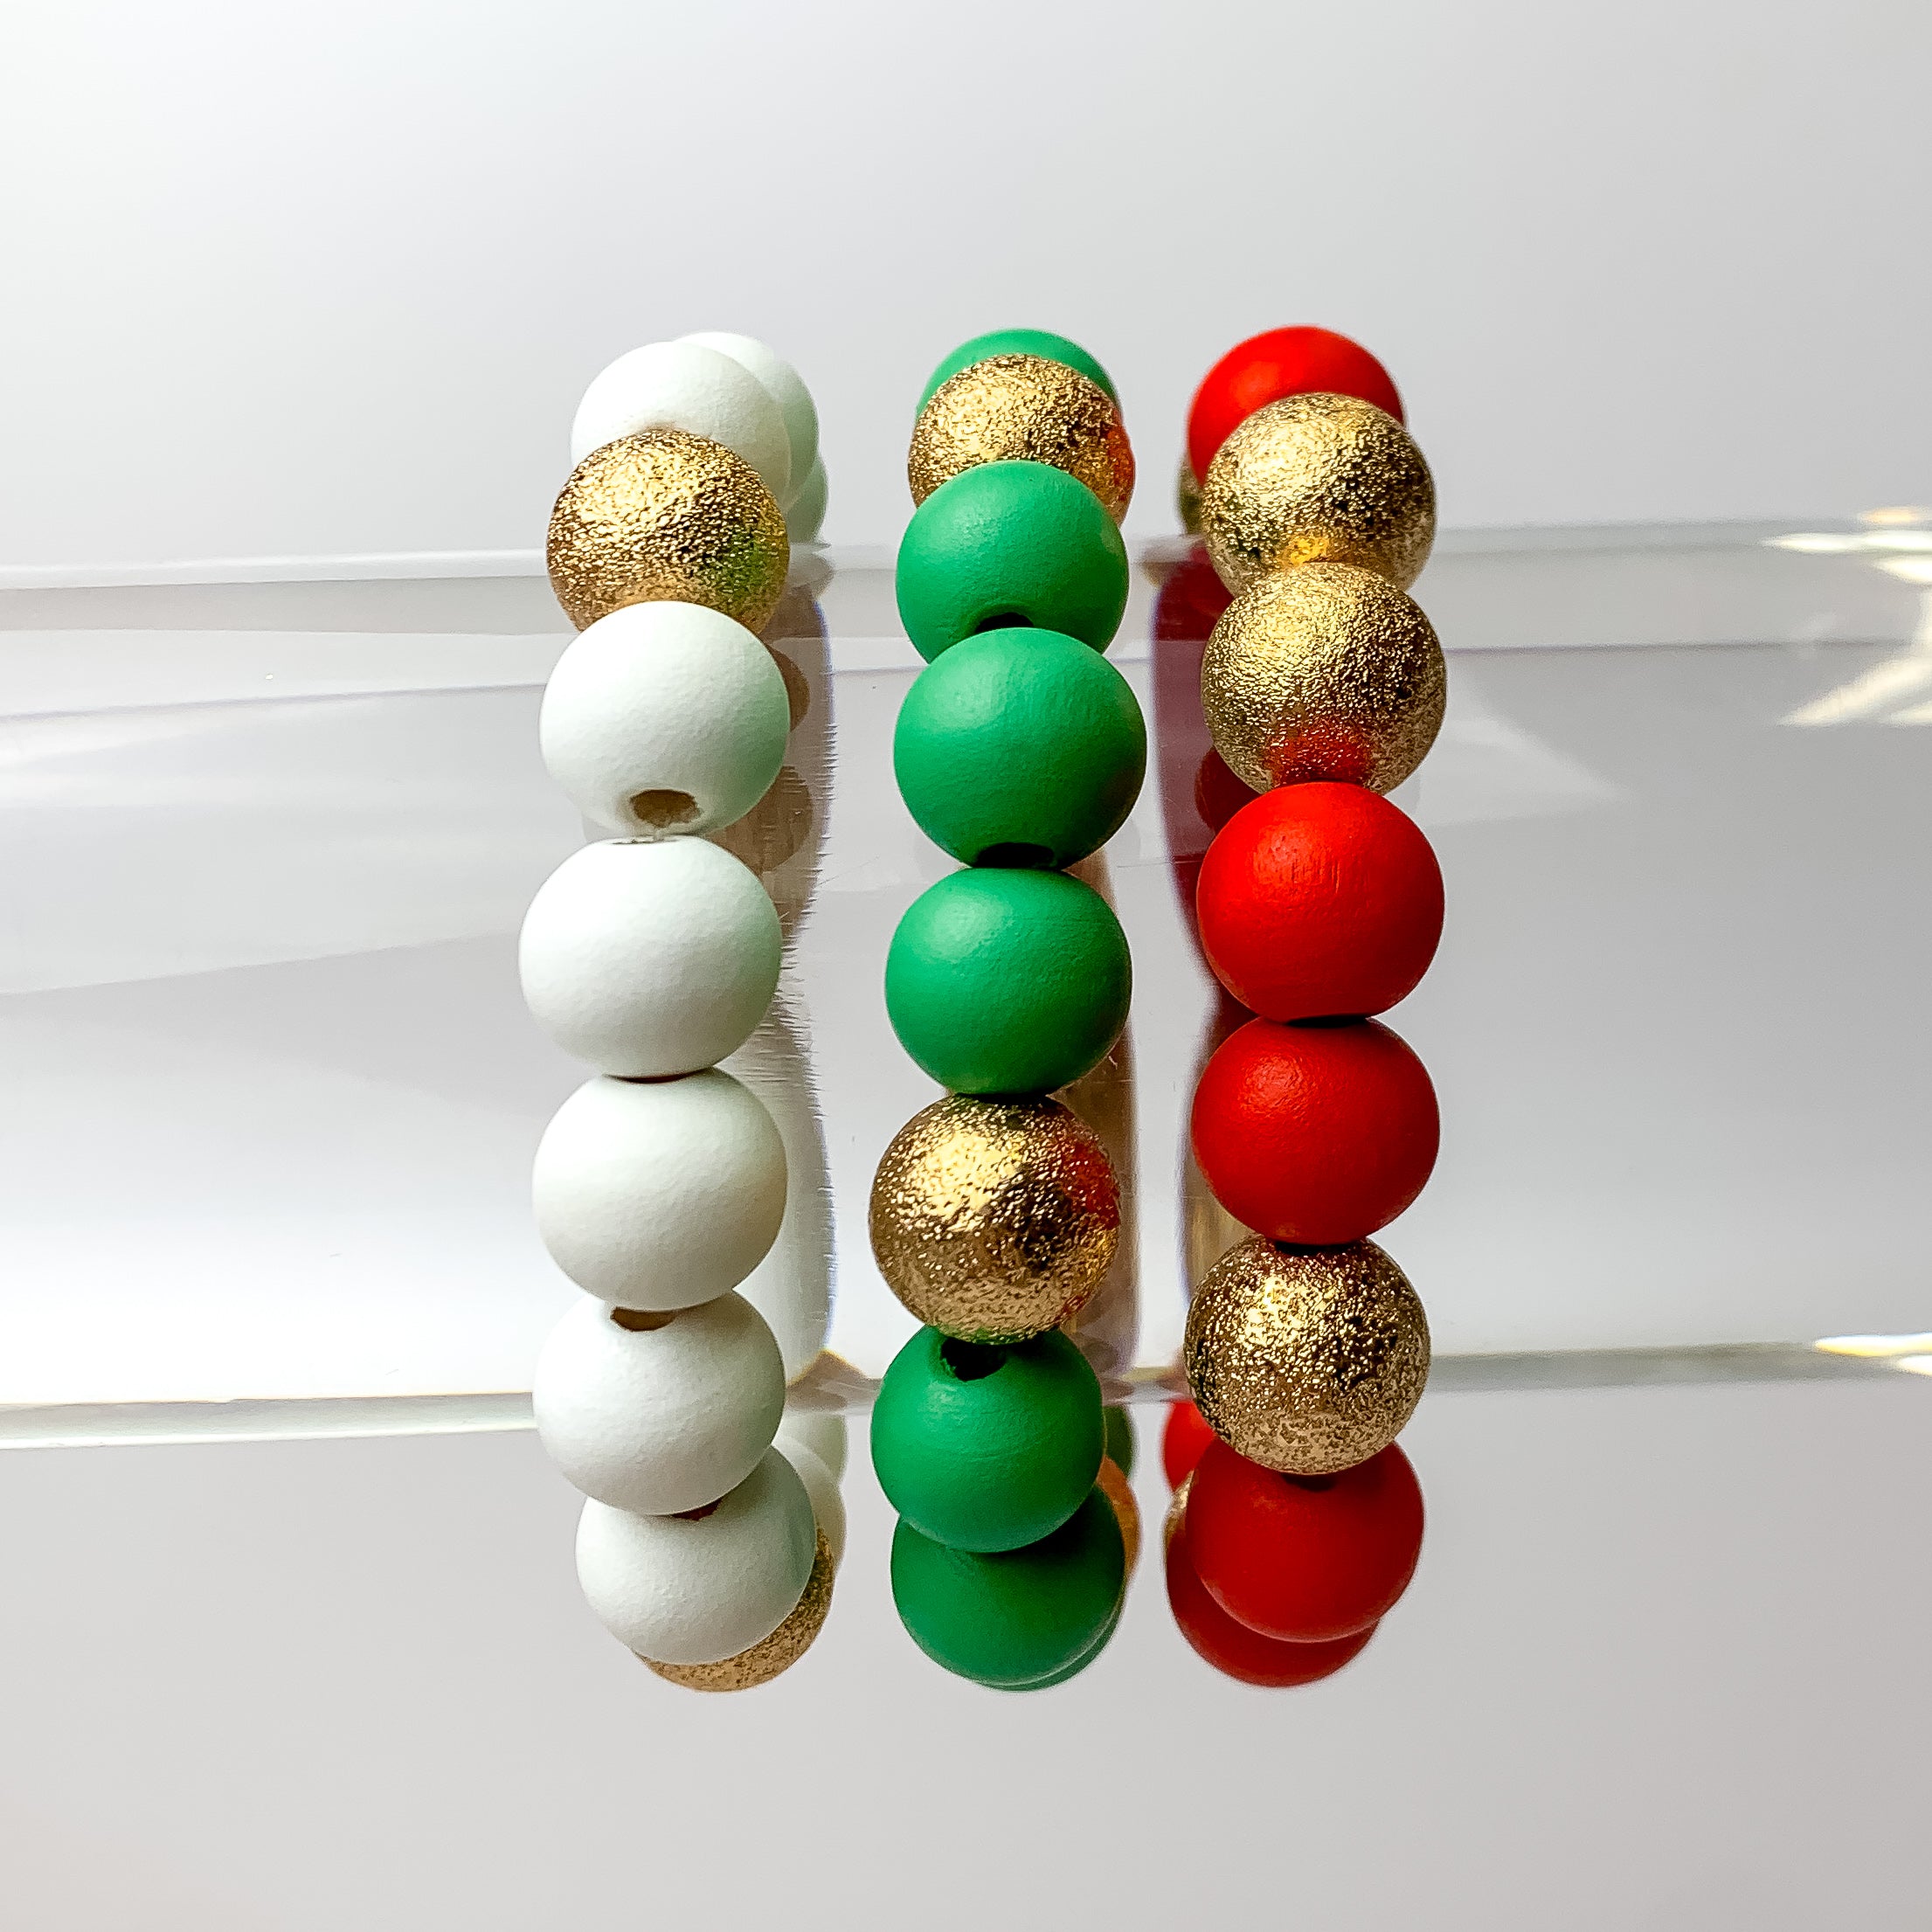 This set of 3 bracelets in the colors red, green, and white are placed on a bracelet display featuring a white background.